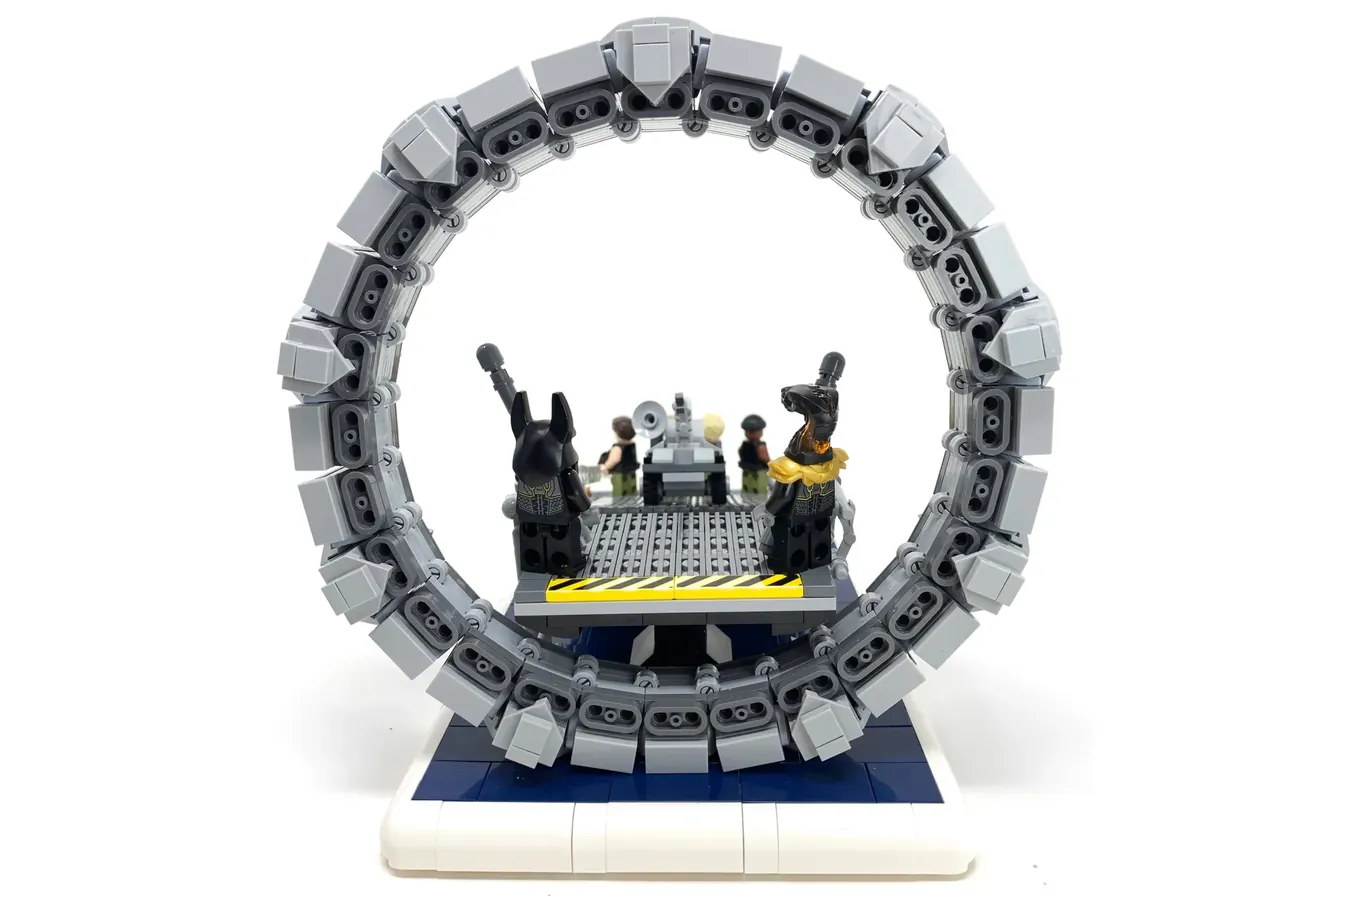 STARGATE Achieves 10K Support on LEGO IDEAS